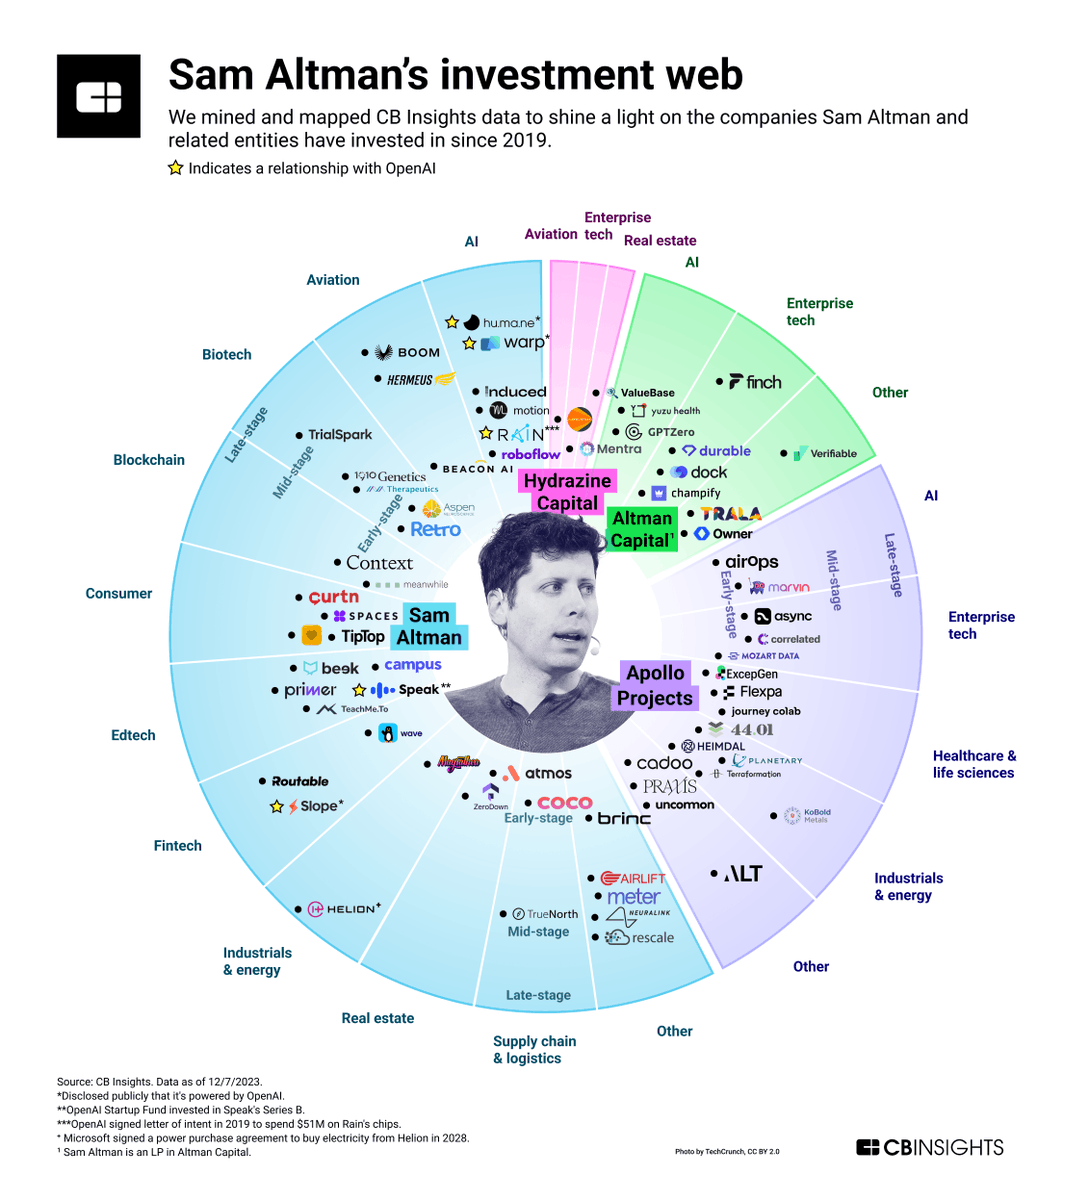 Sam Altman is a remarkably active angel investor with over 100 investments since 2010. His investments highlight wide-ranging interests, including lab-grown meat, longevity, education and, of course, AI. Here's Altman’s universe of portfolio companies by category since 2019: